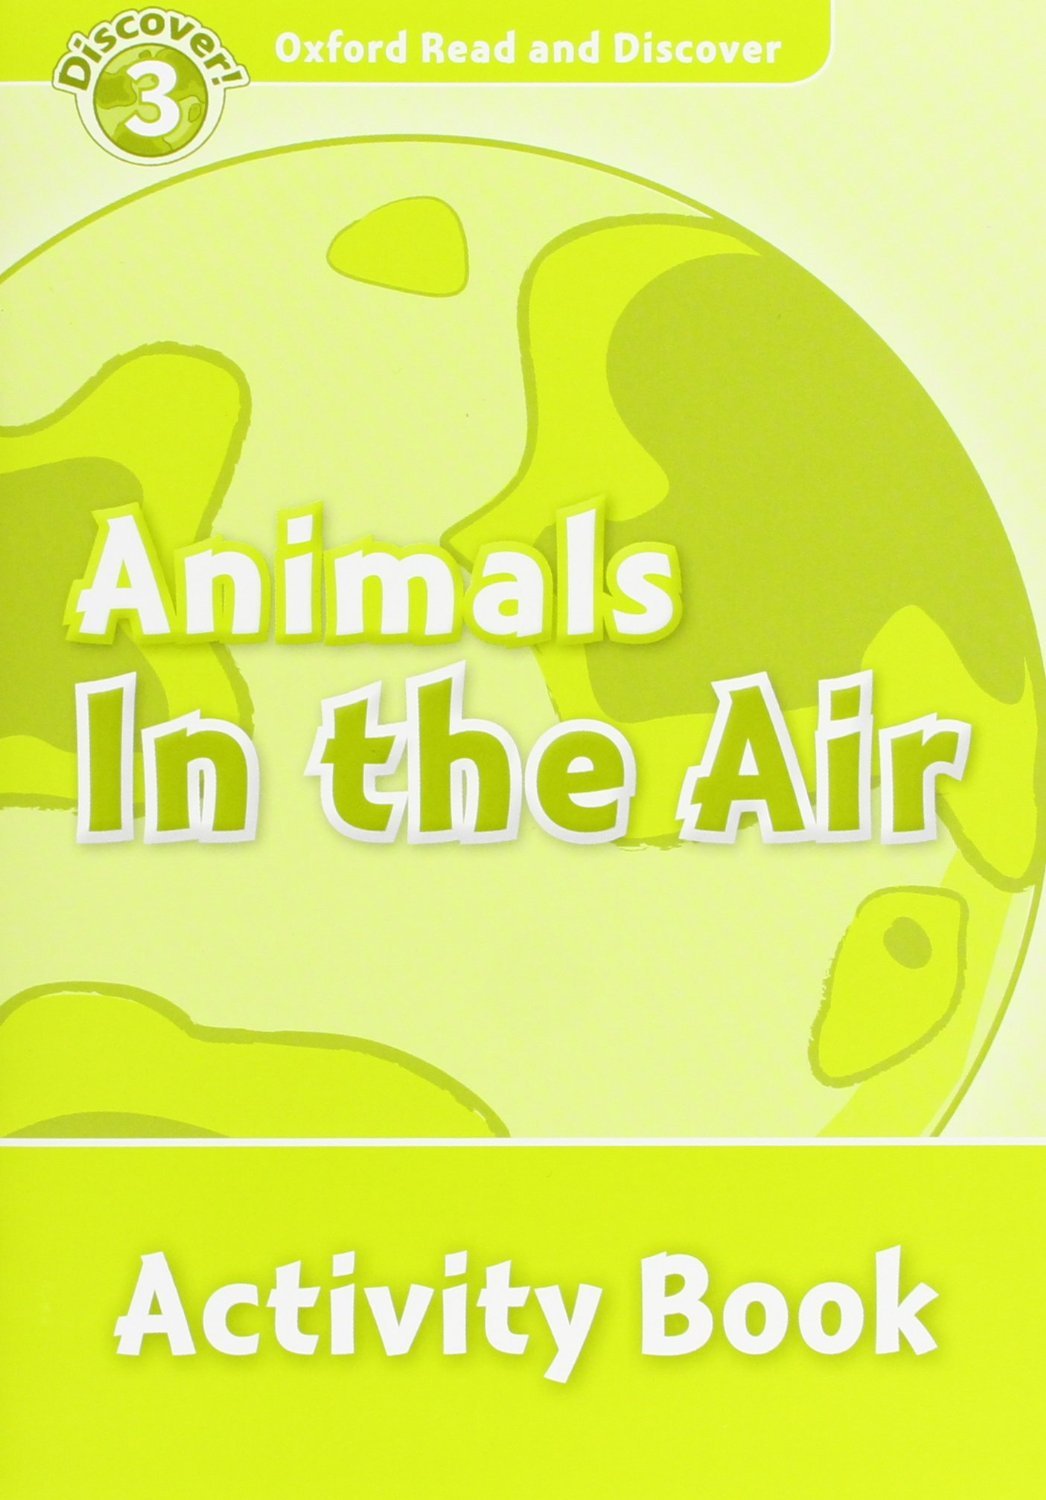 ANIMALS IN THE AIR (OXFORD READ AND DISCOVER, LEVEL 3) Activity Book